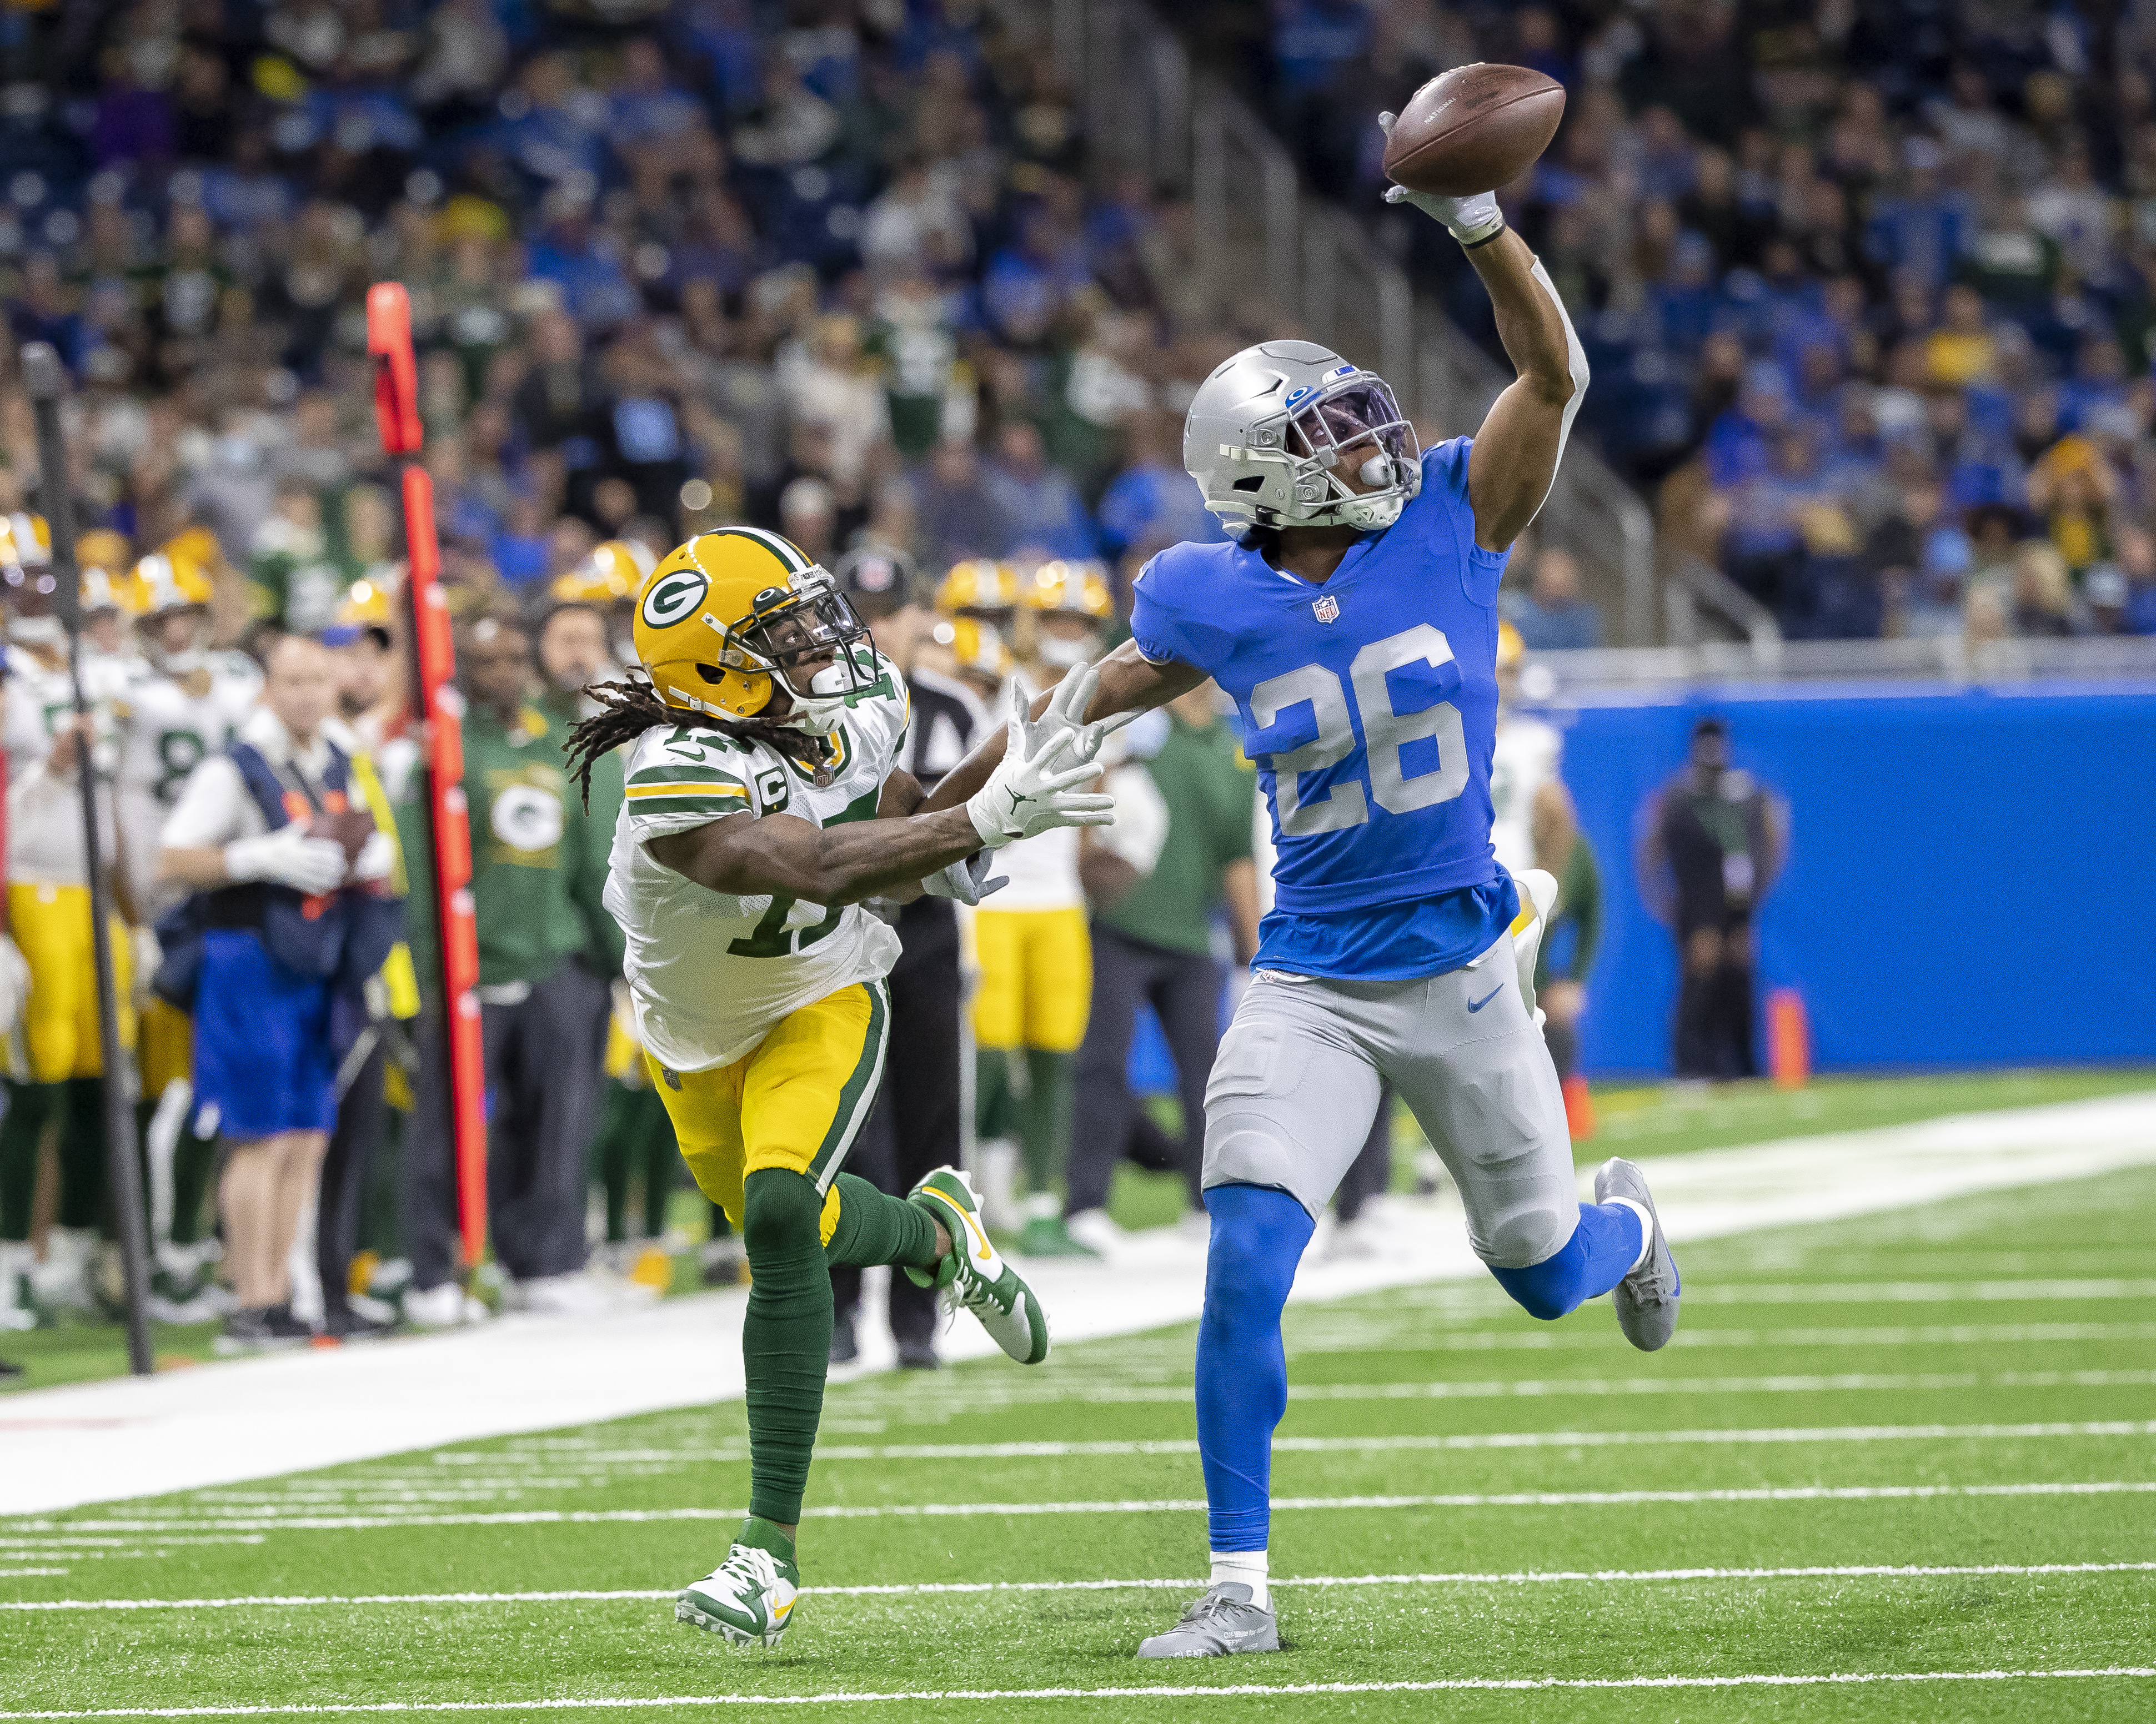 NFL: Green Bay Packers at Detroit Lions